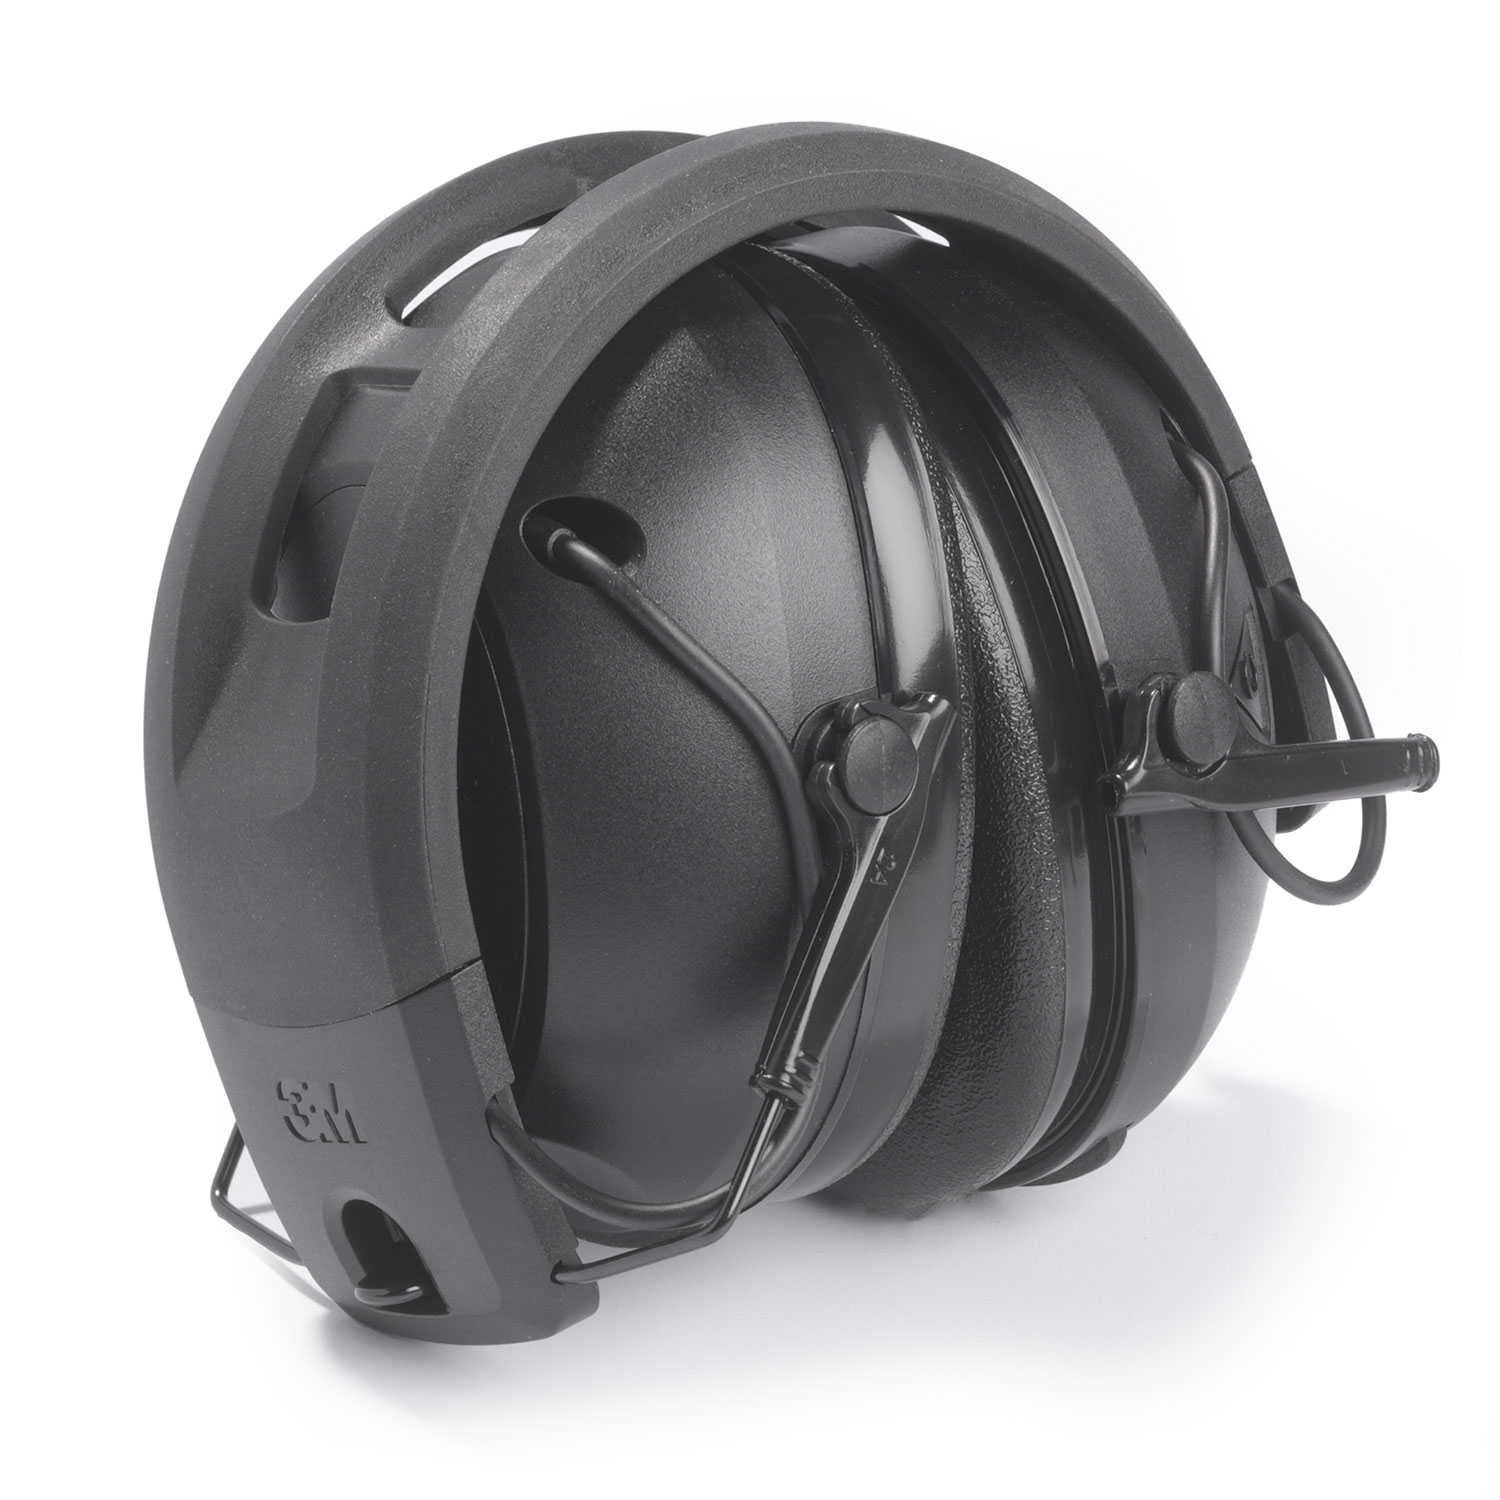 3M PELTOR SPORT Tactical 300 Electronic Hearing Protector